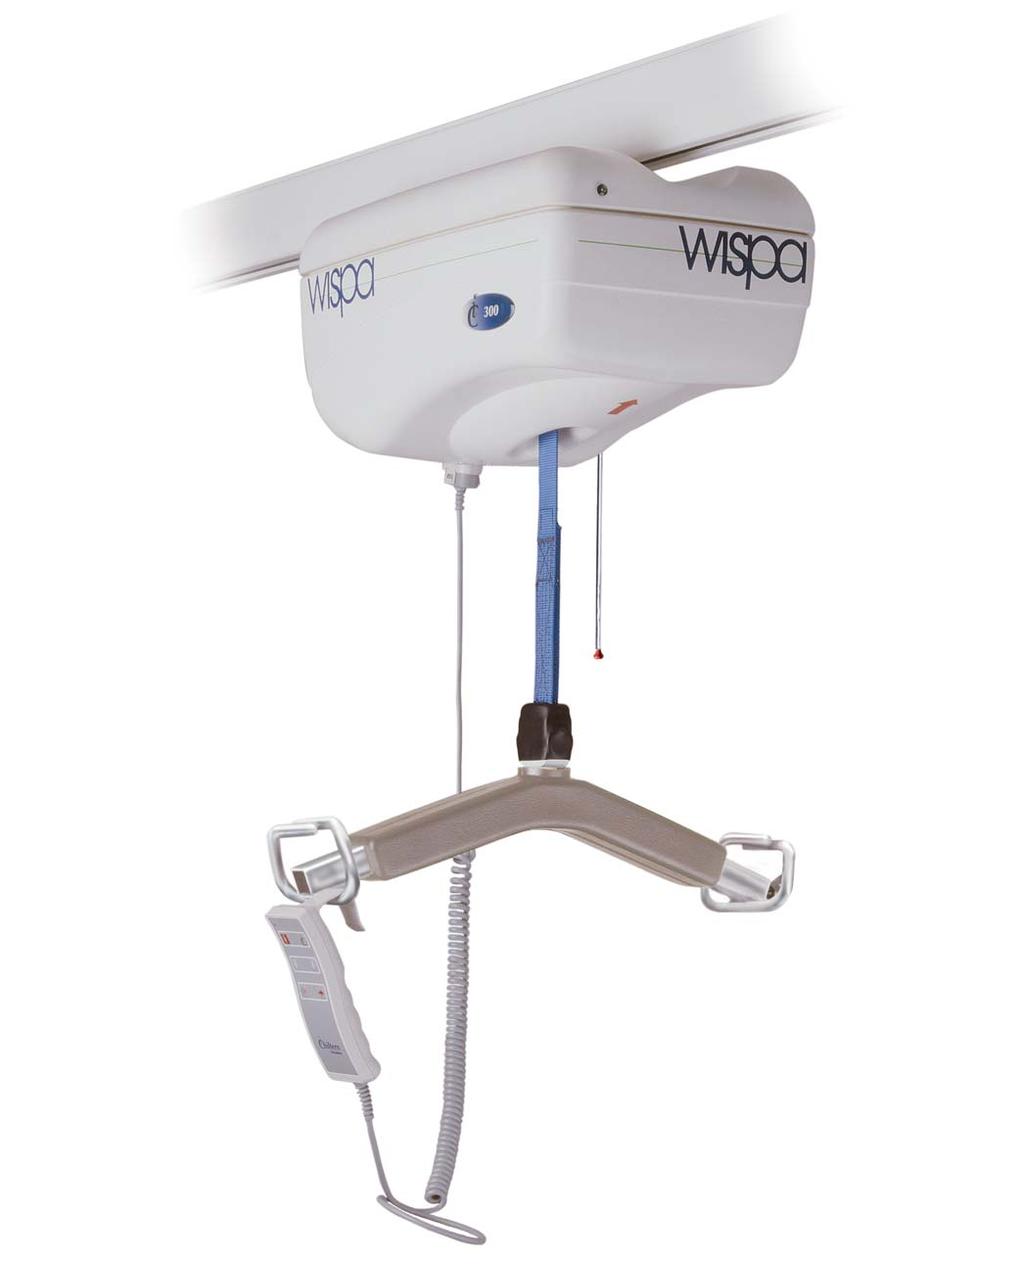 Wispa 200 and 300 Series Ceiling Mounted Hoist Freewheel or powered traverse models Self diagnostic - beeps if there is a